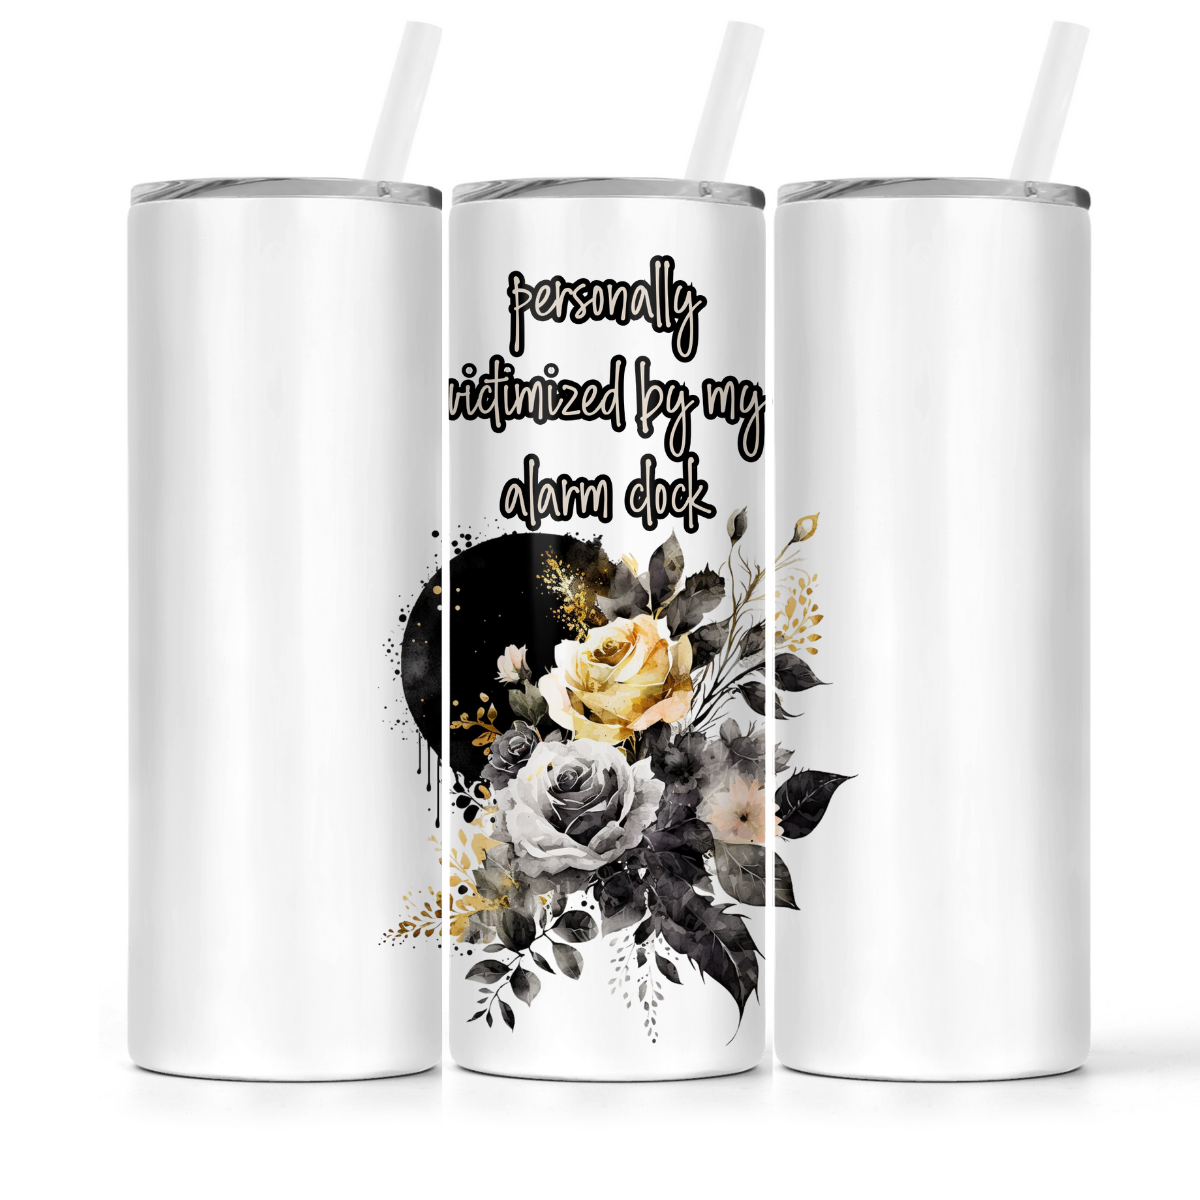 Personally Victimized | 20oz Tumbler - The Pretty Things.ca